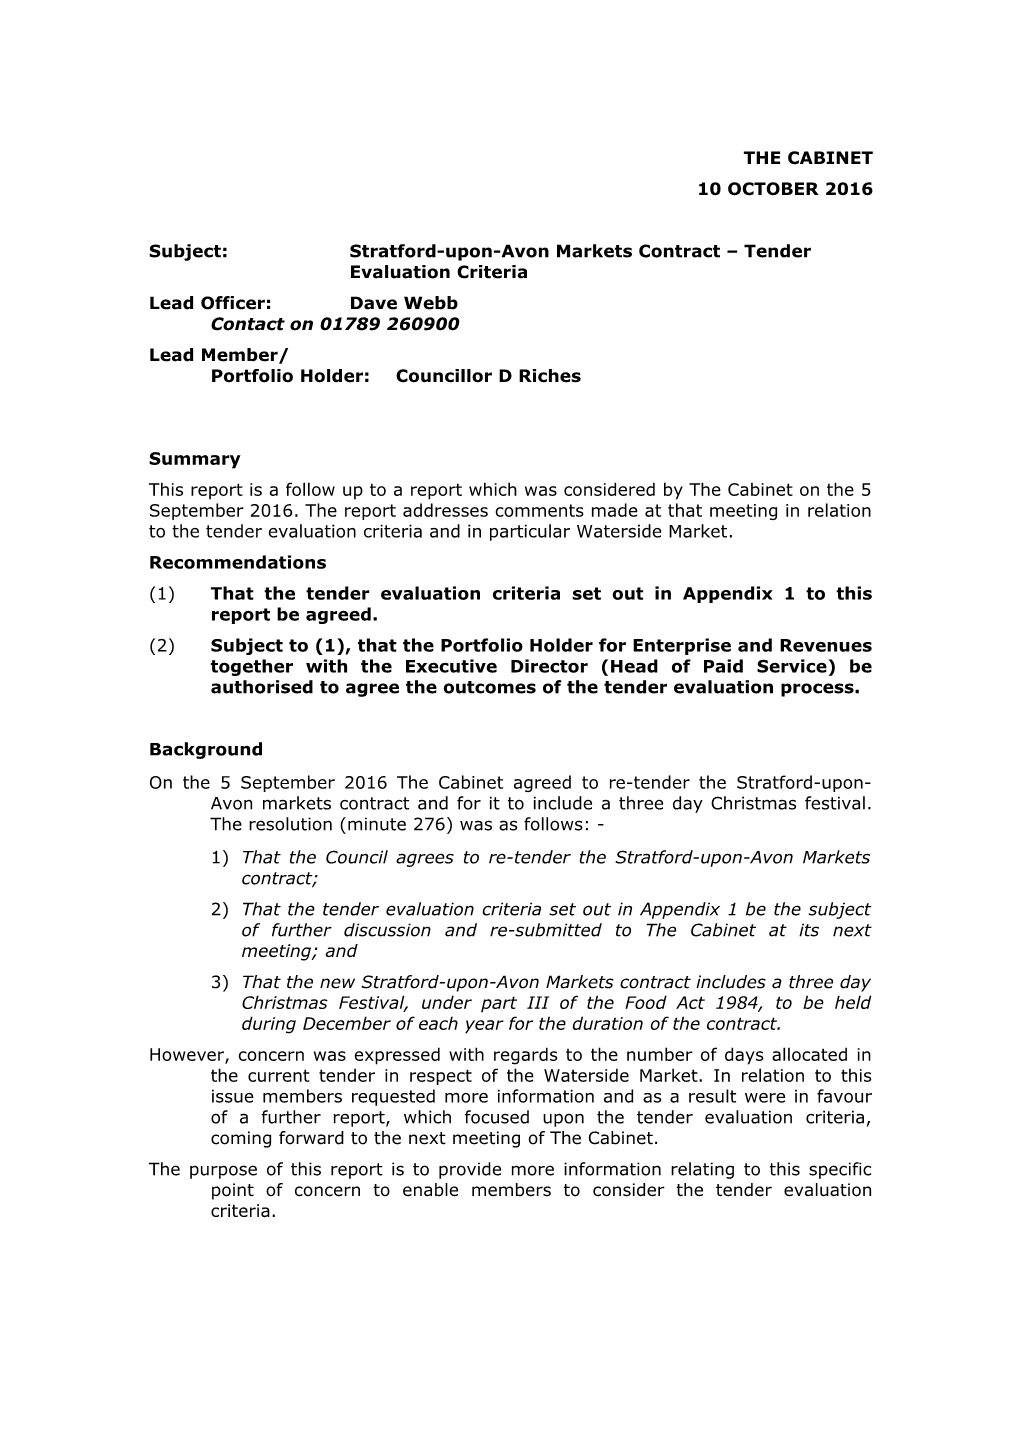 Subject:Stratford-Upon-Avon Markets Contract Tender Evaluation Criteria